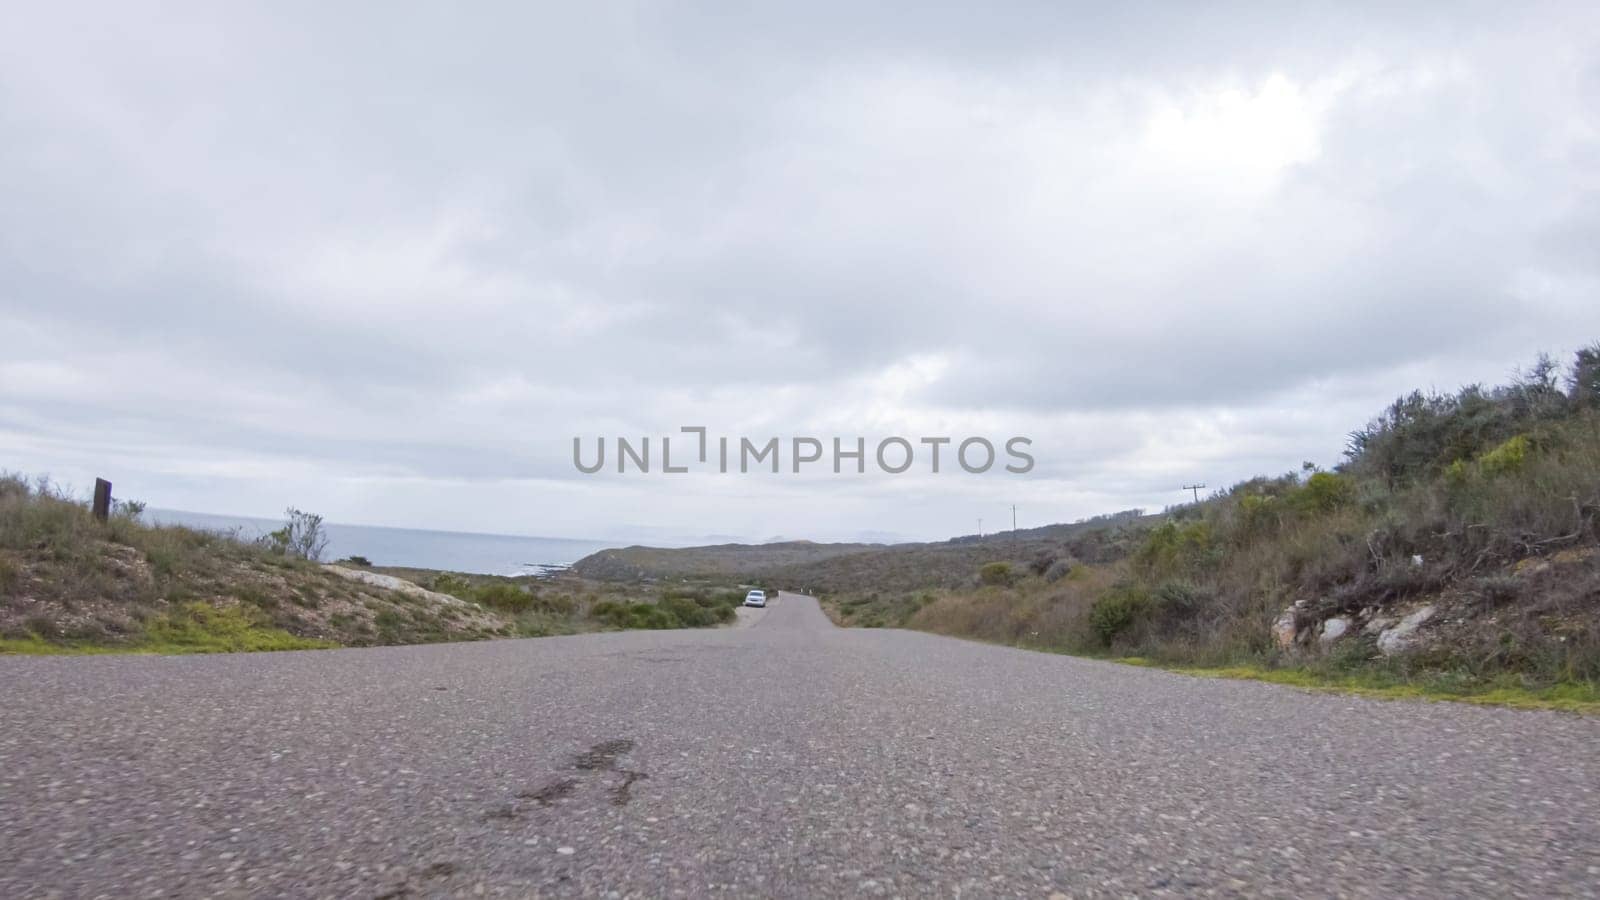 Driving through winter’s embrace in Montana de Oro by arinahabich